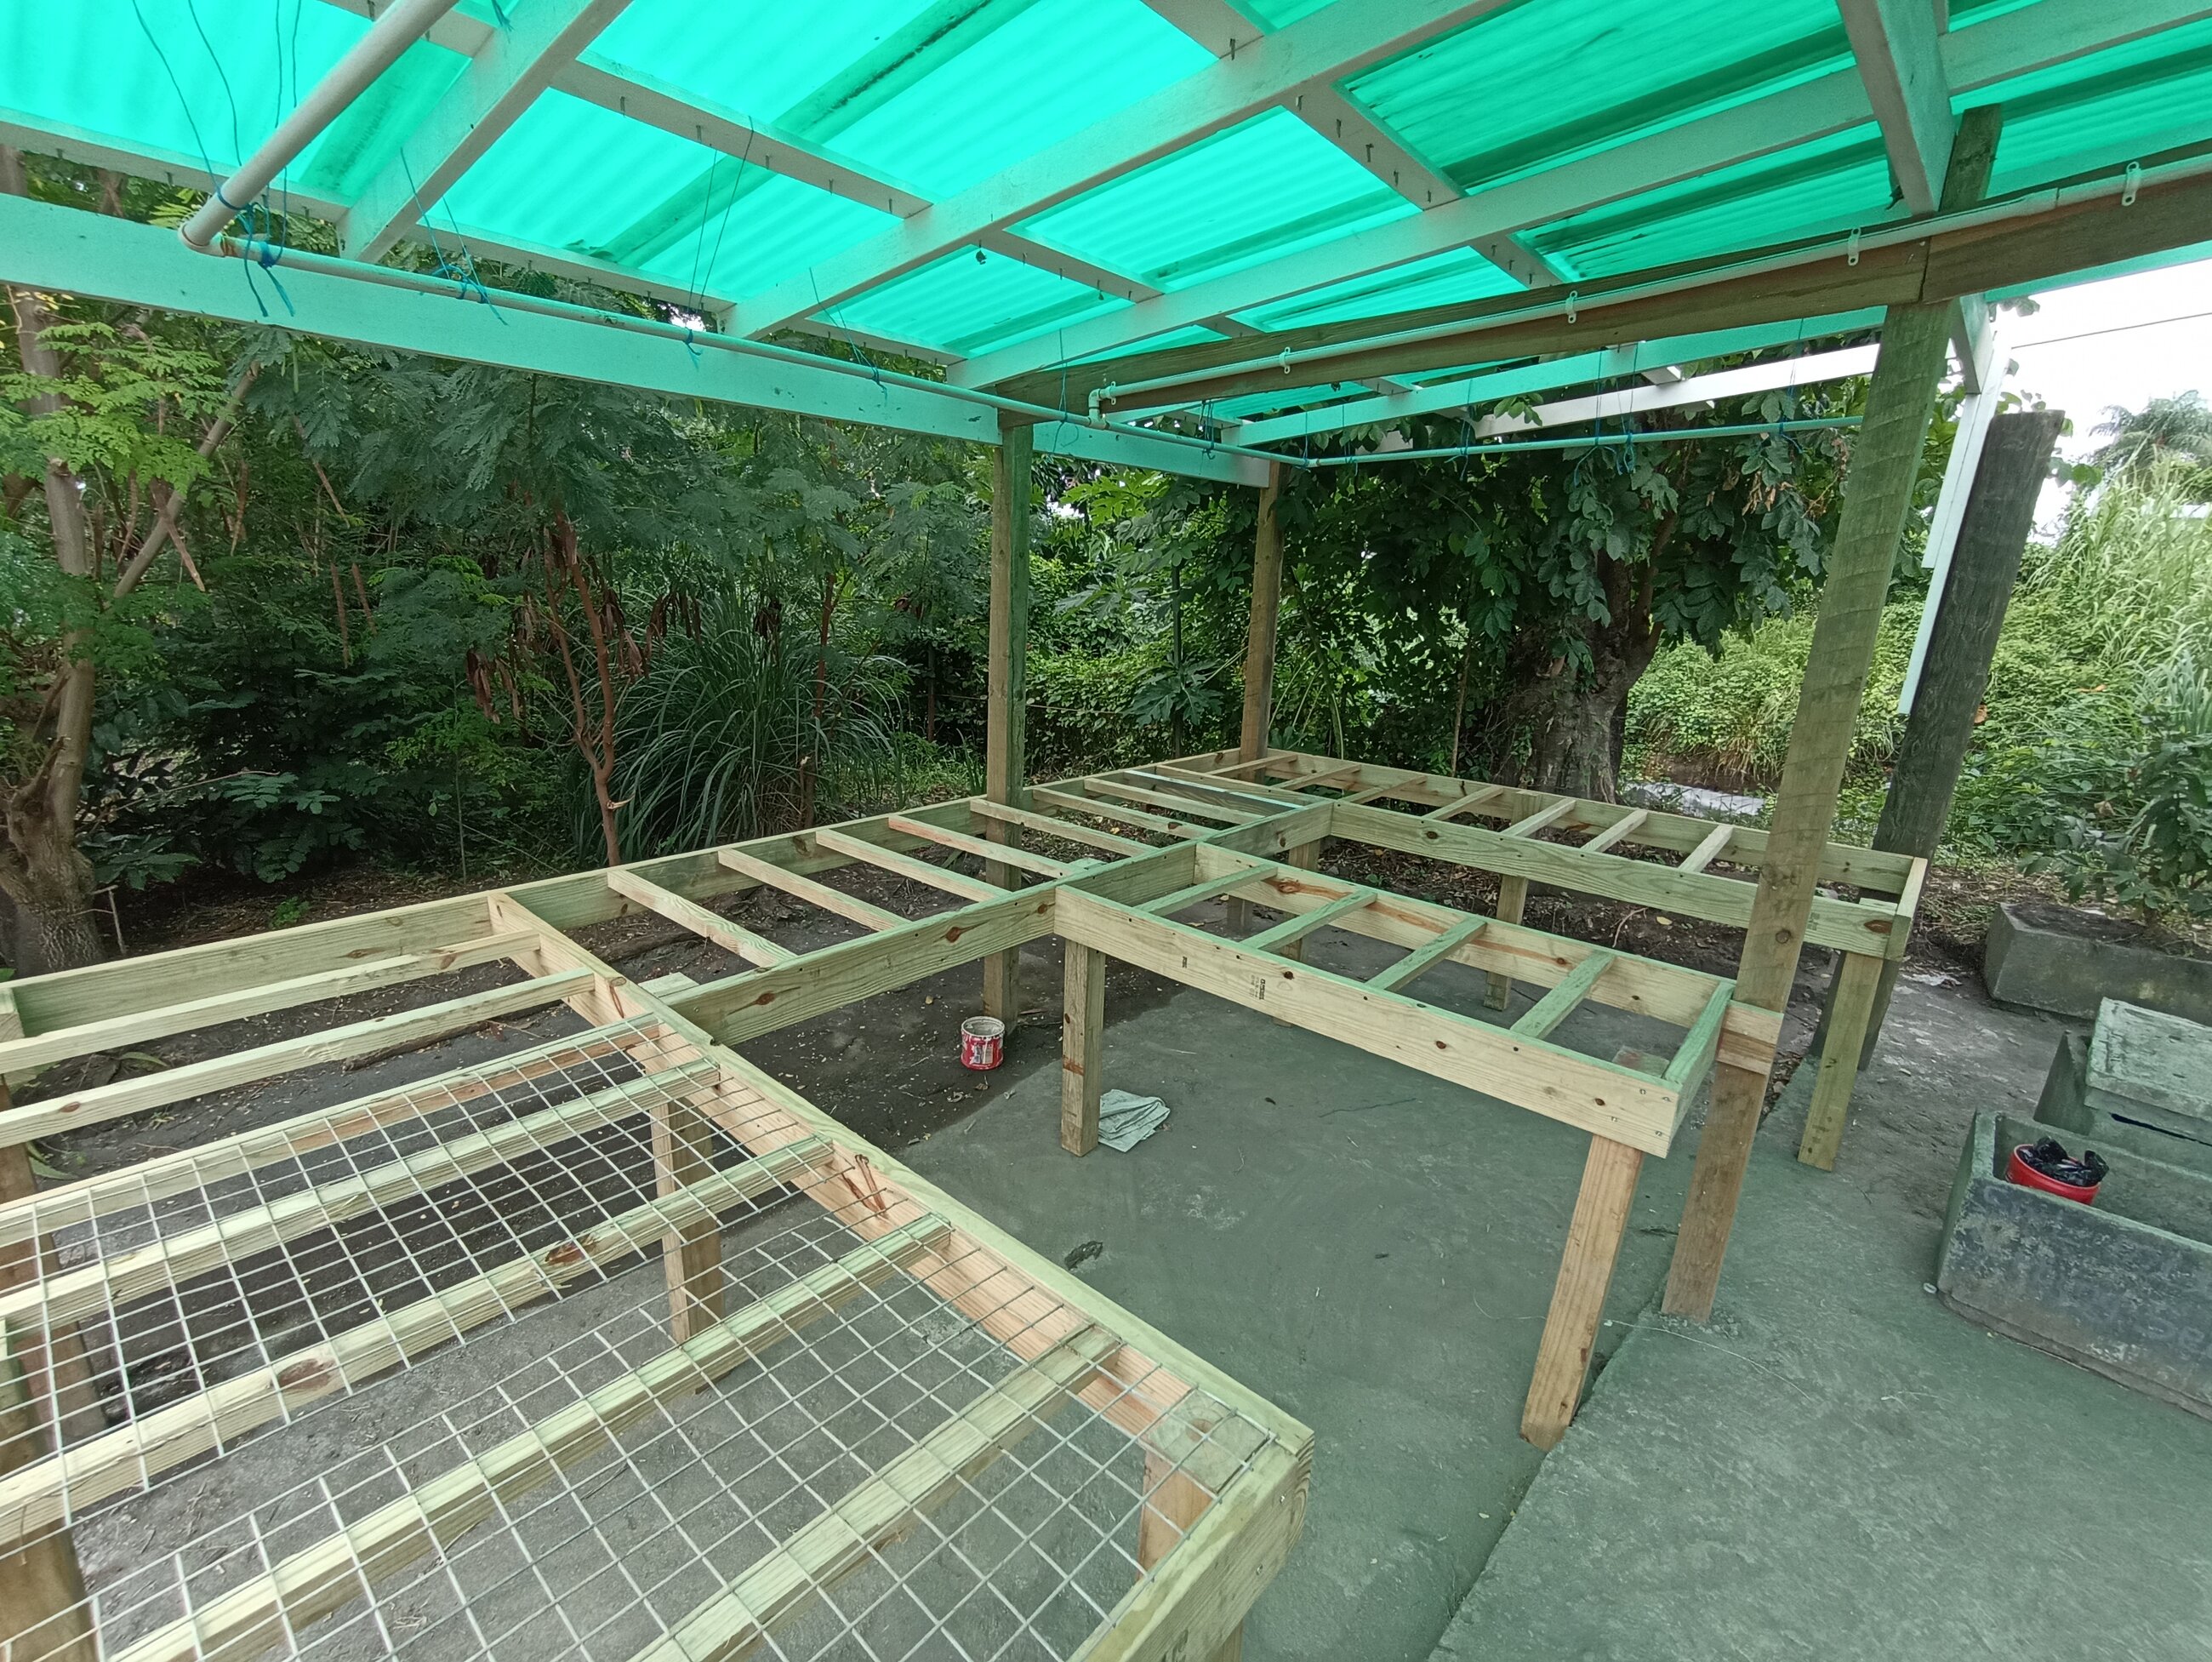 Improving tree nursery by building a nursery table and irrigation system